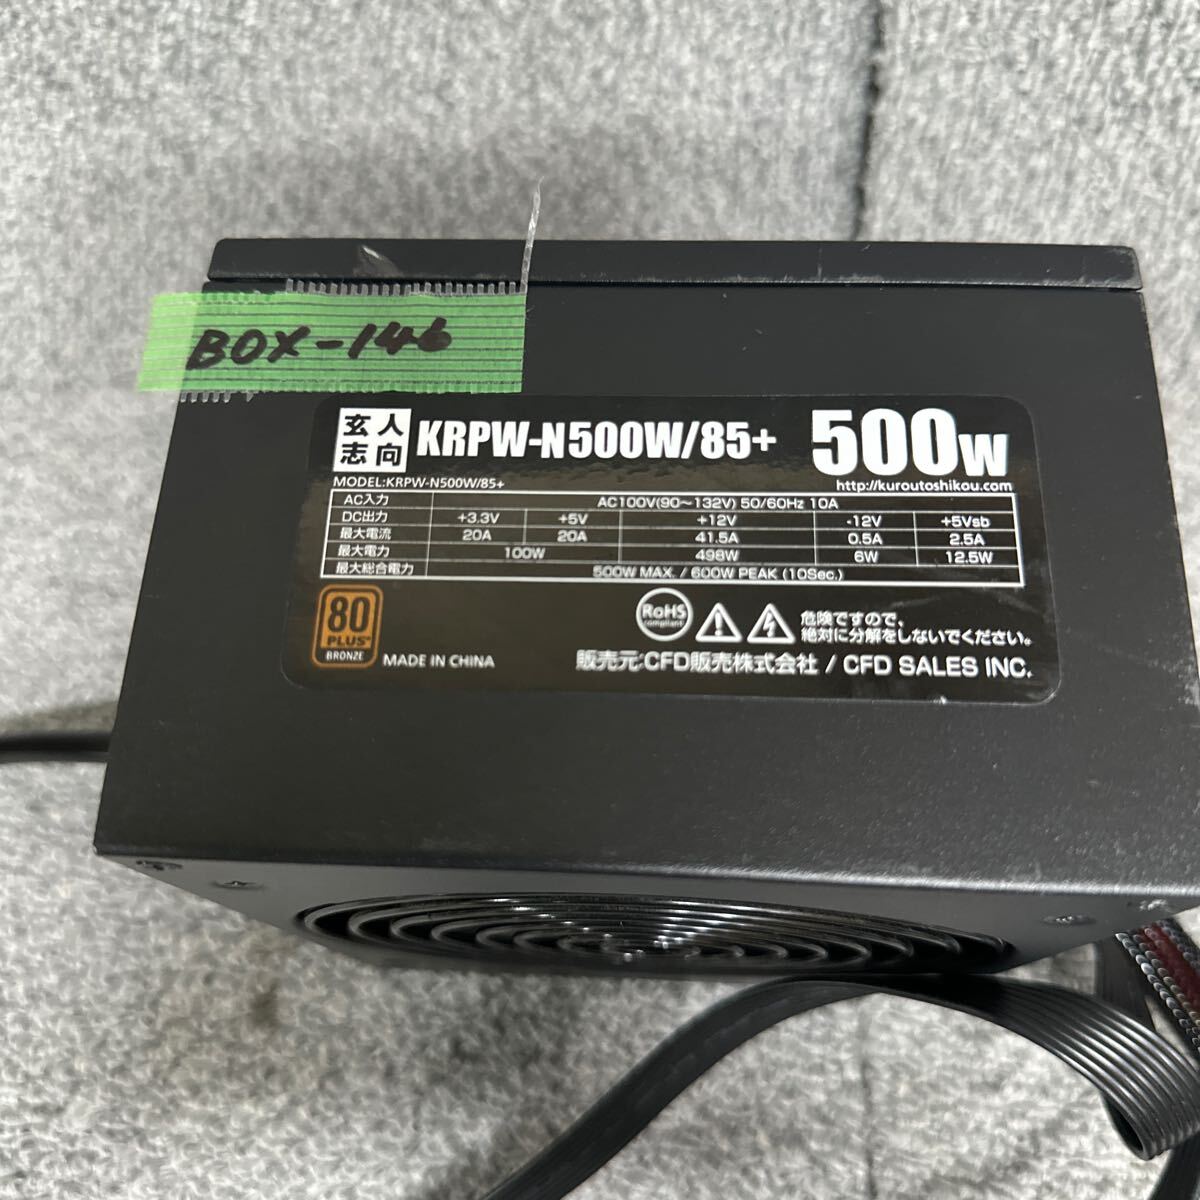 GK super-discount BOX-146 PC power supply BOX. person intention KRPW-N500W/85+ 500W 80PLUS BRONZE power supply unit voltage has confirmed secondhand goods 